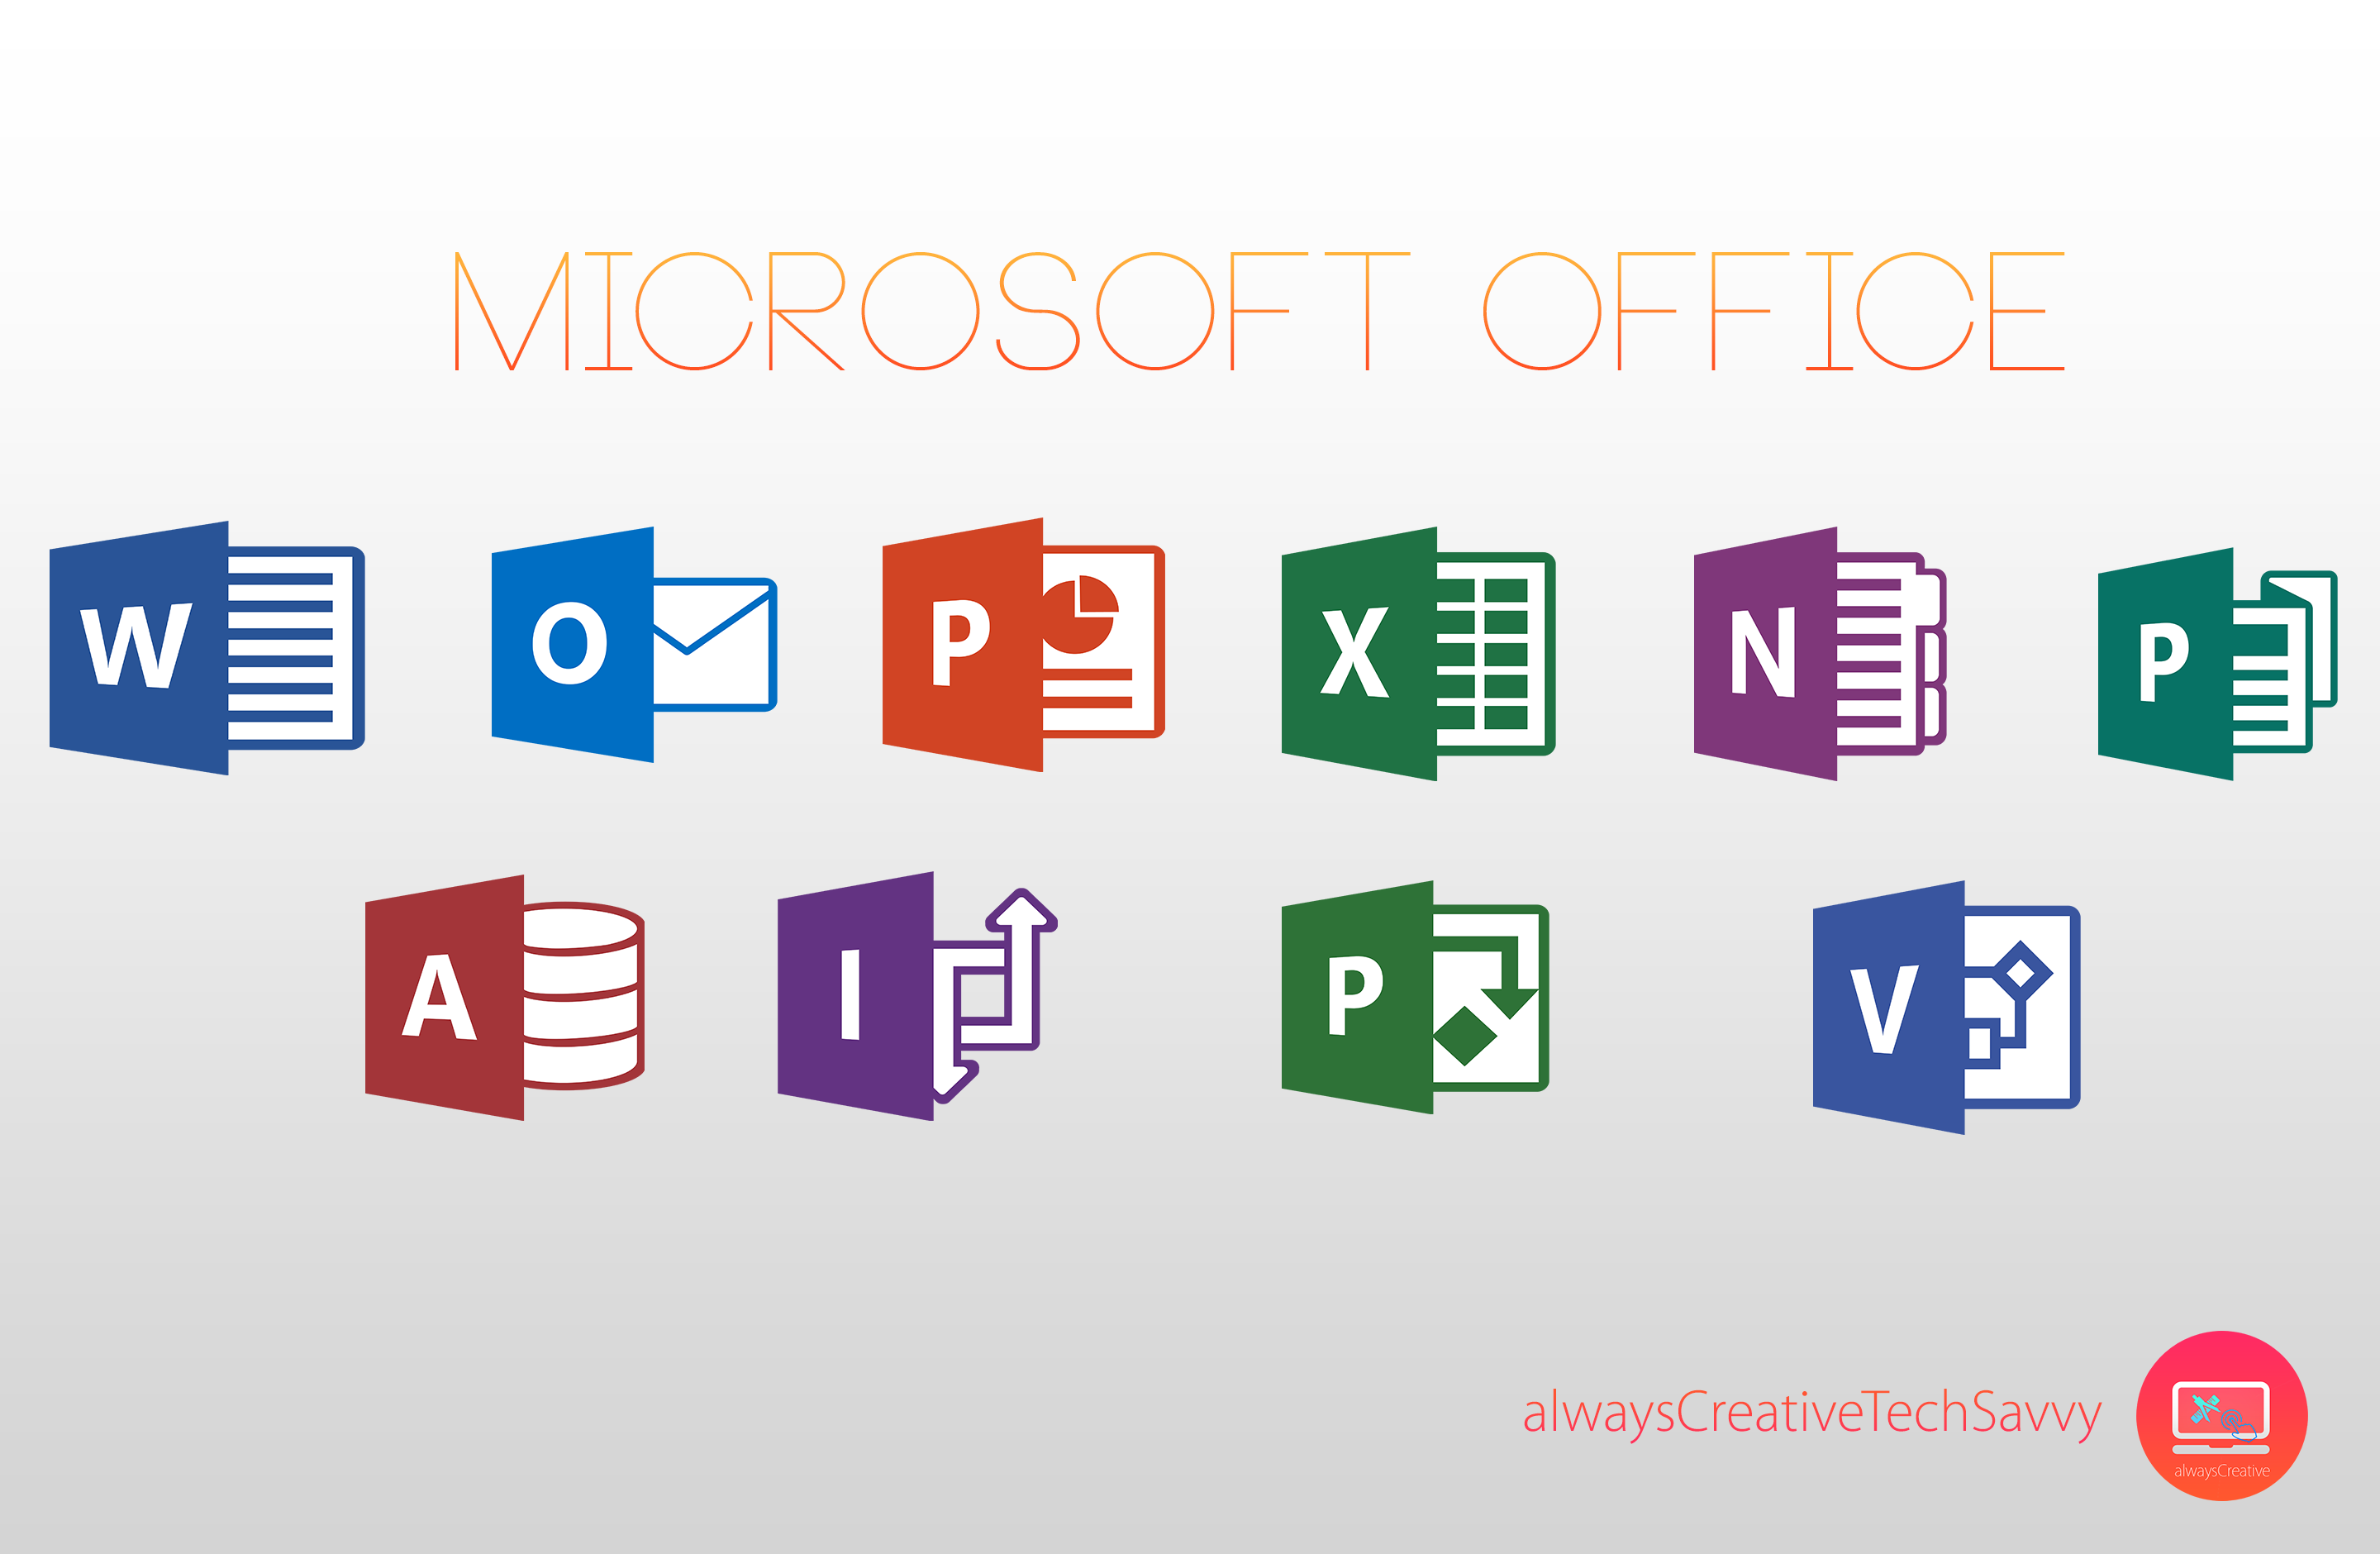 new version of microsoft office release date